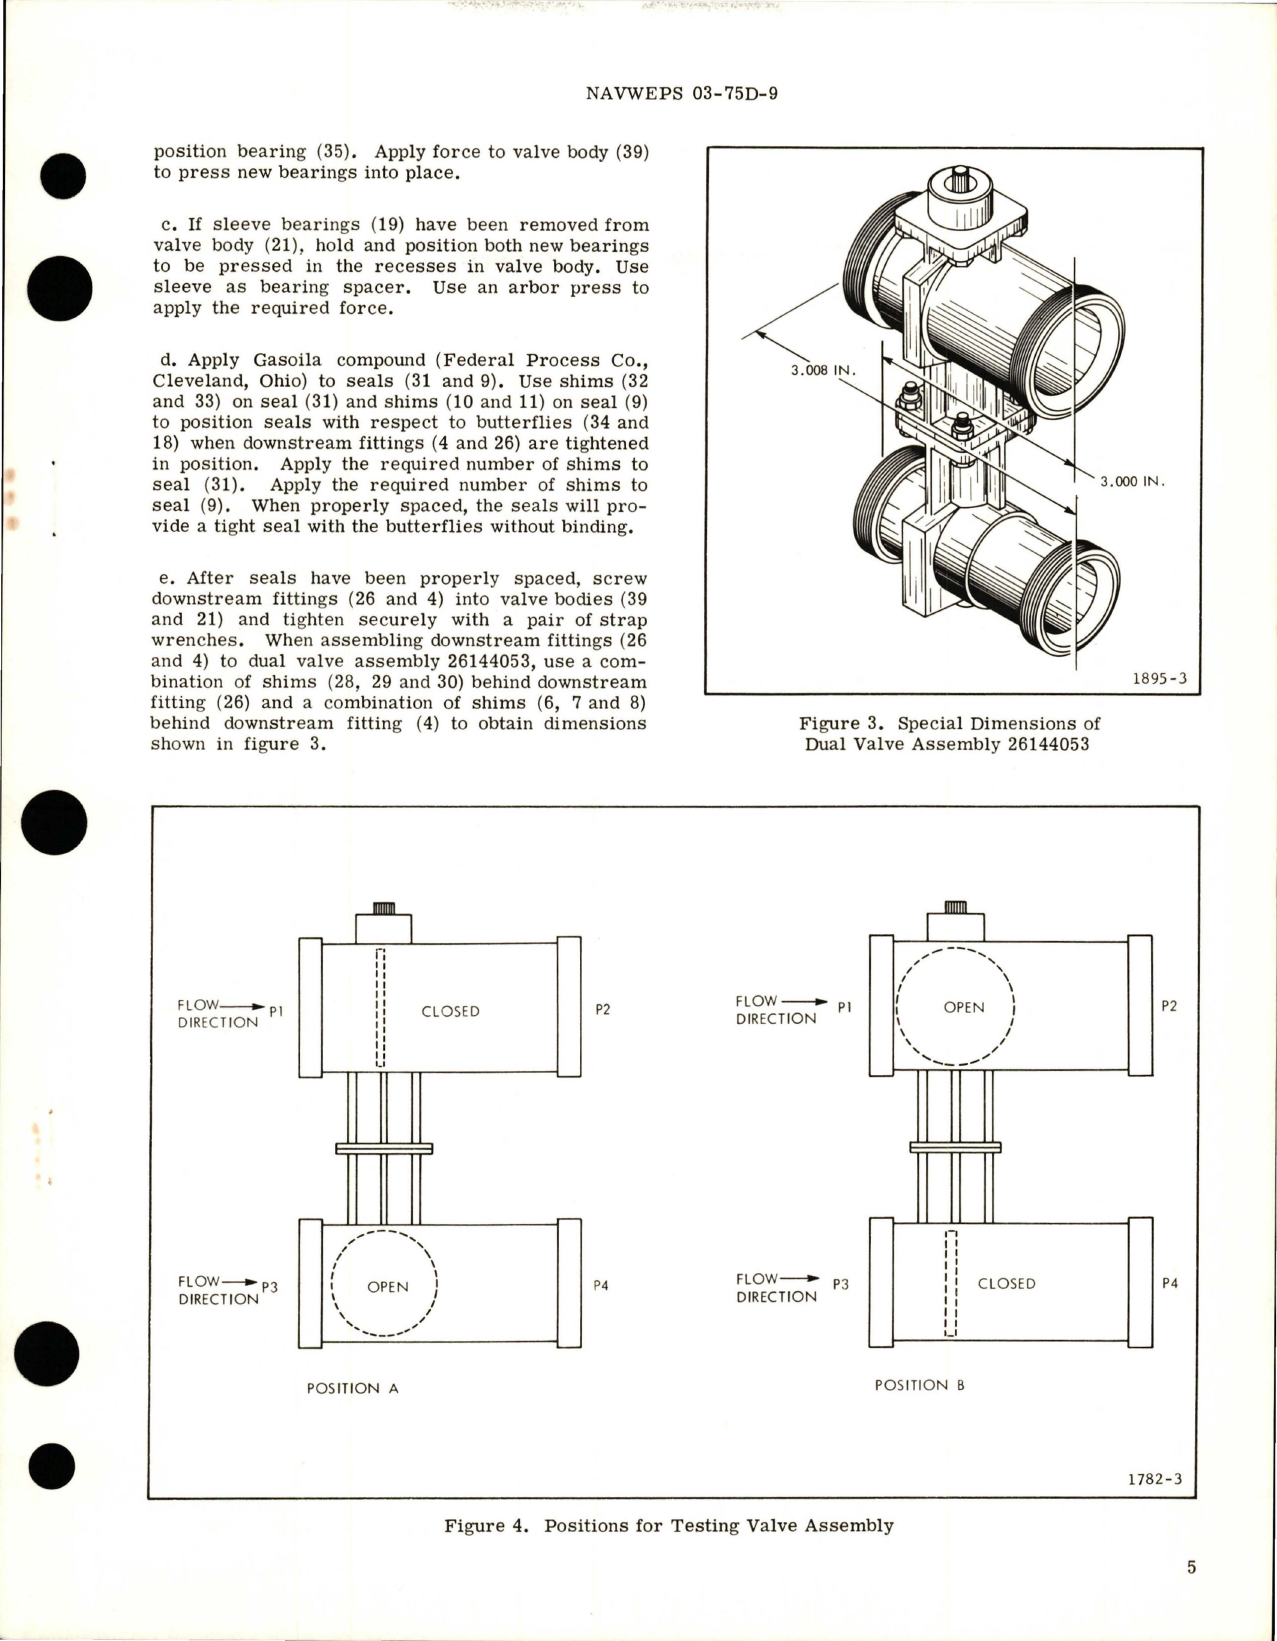 Sample page 5 from AirCorps Library document: Overhaul Instructions with Illustrated Parts Breakdown for Dual Valve Assembly